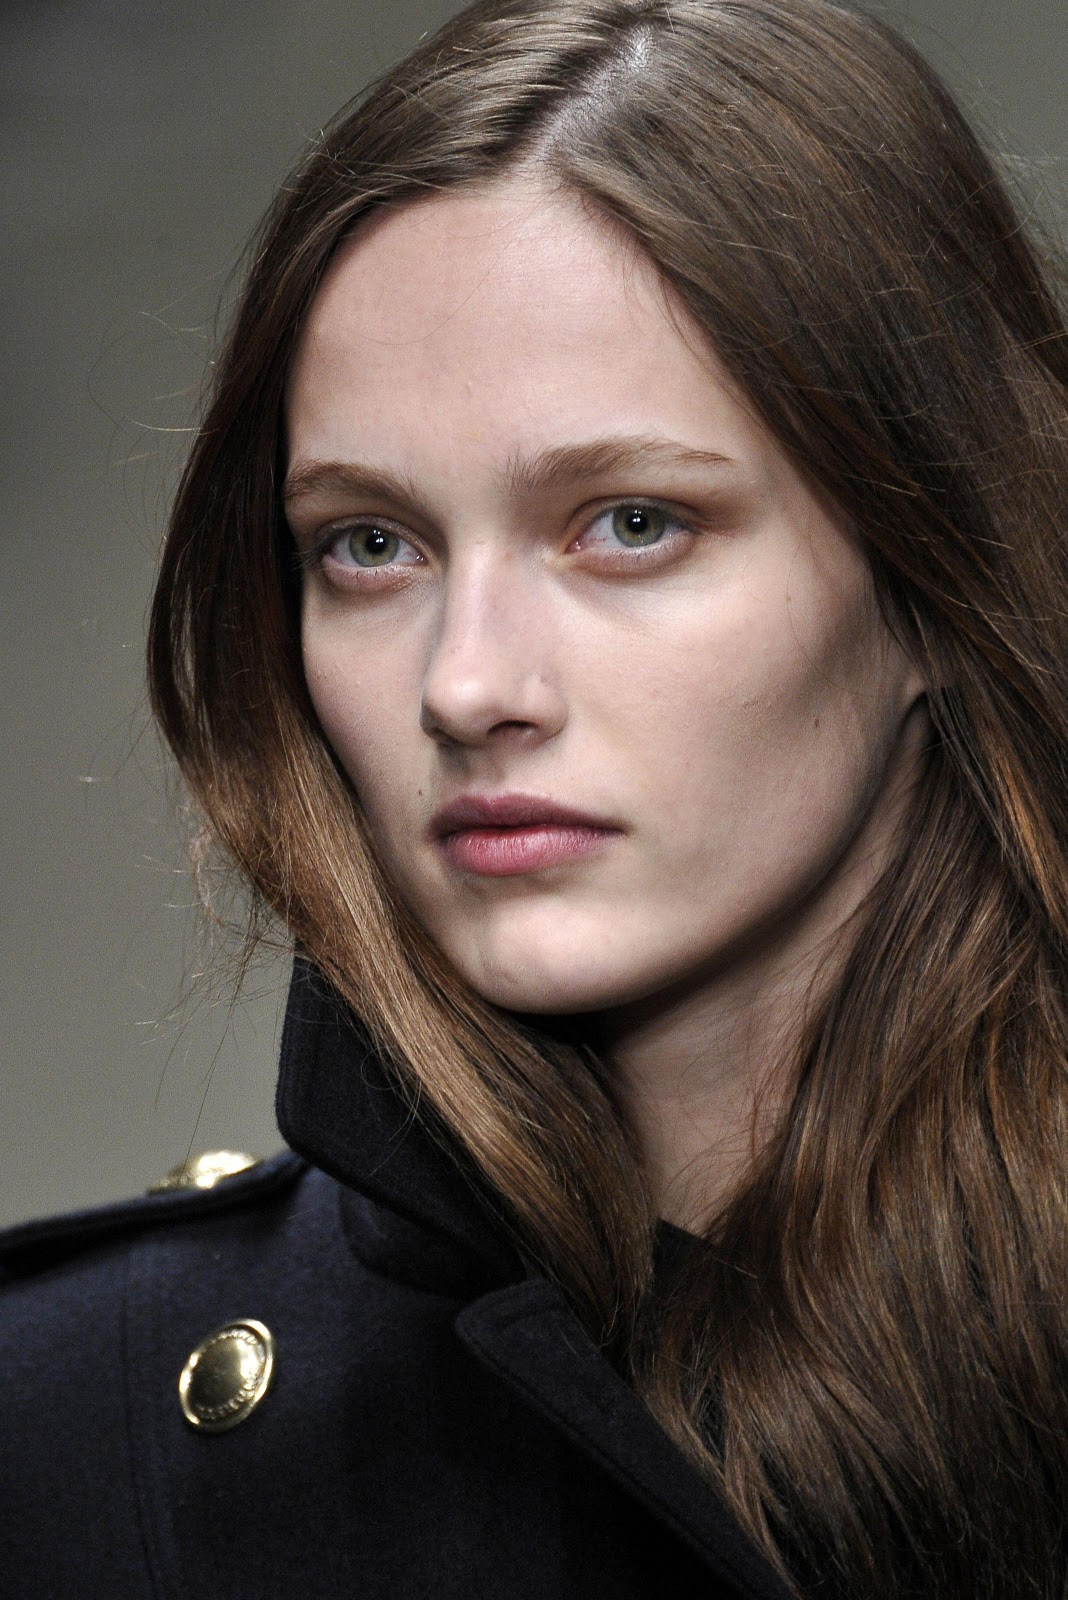 12 Models with Prominent Cheekbones - The Front Row View